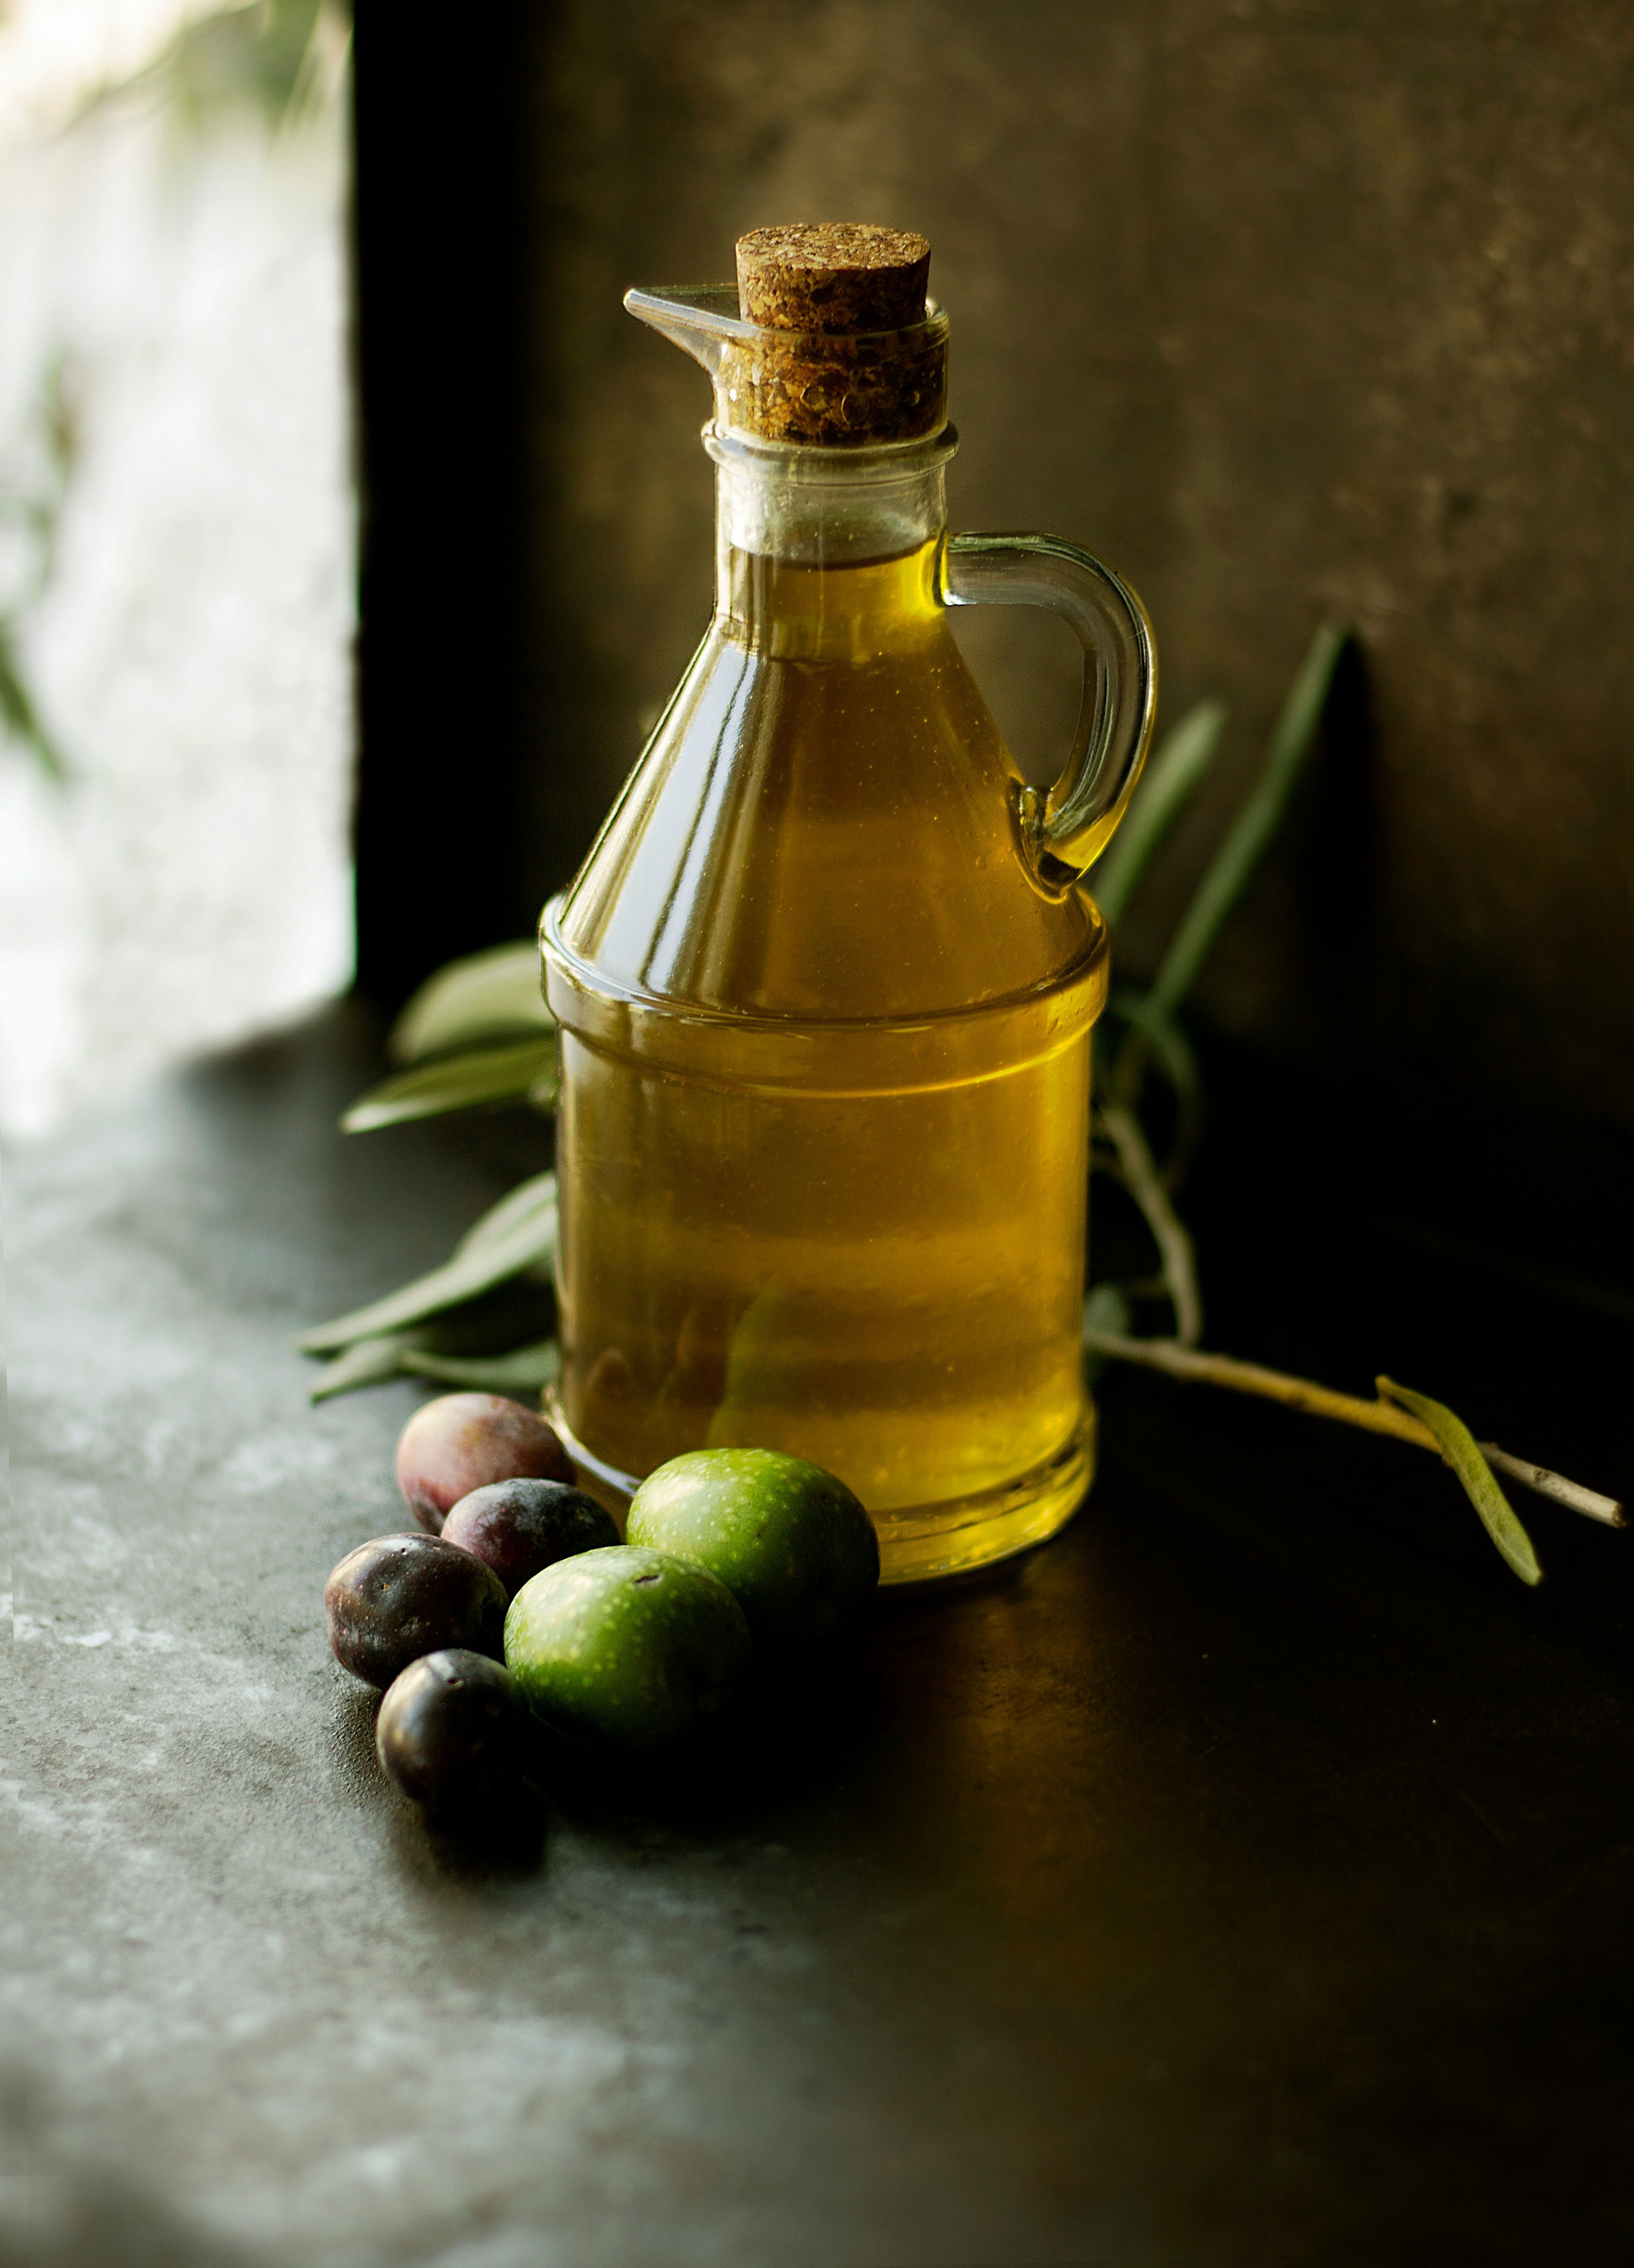 The price of olive oil reaches historic highs. What can we expect in the near future?